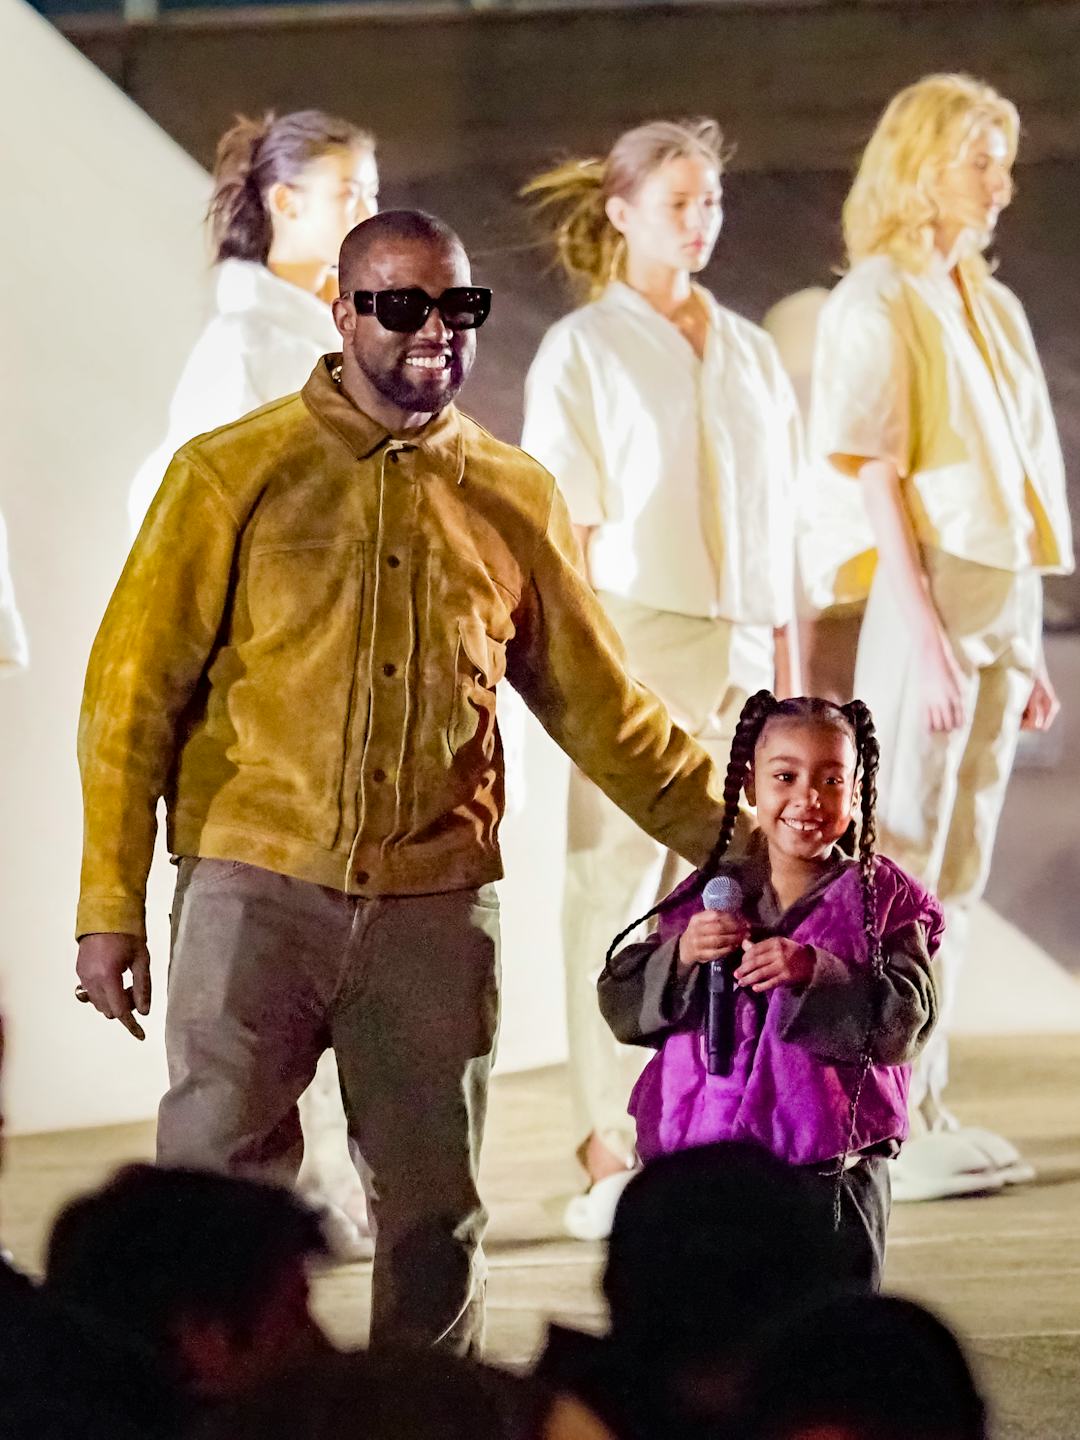 bao kanye west and his daughter perform a super cute fashion show on the street with kim kardashian about to launch a winter fashion collection 653abd34da572 Kanye West And His Daughter Perform A Super Cute Fashion Show On The Street With Kim Kardashian, About To Launch A Winter 2023 Fashion Collection